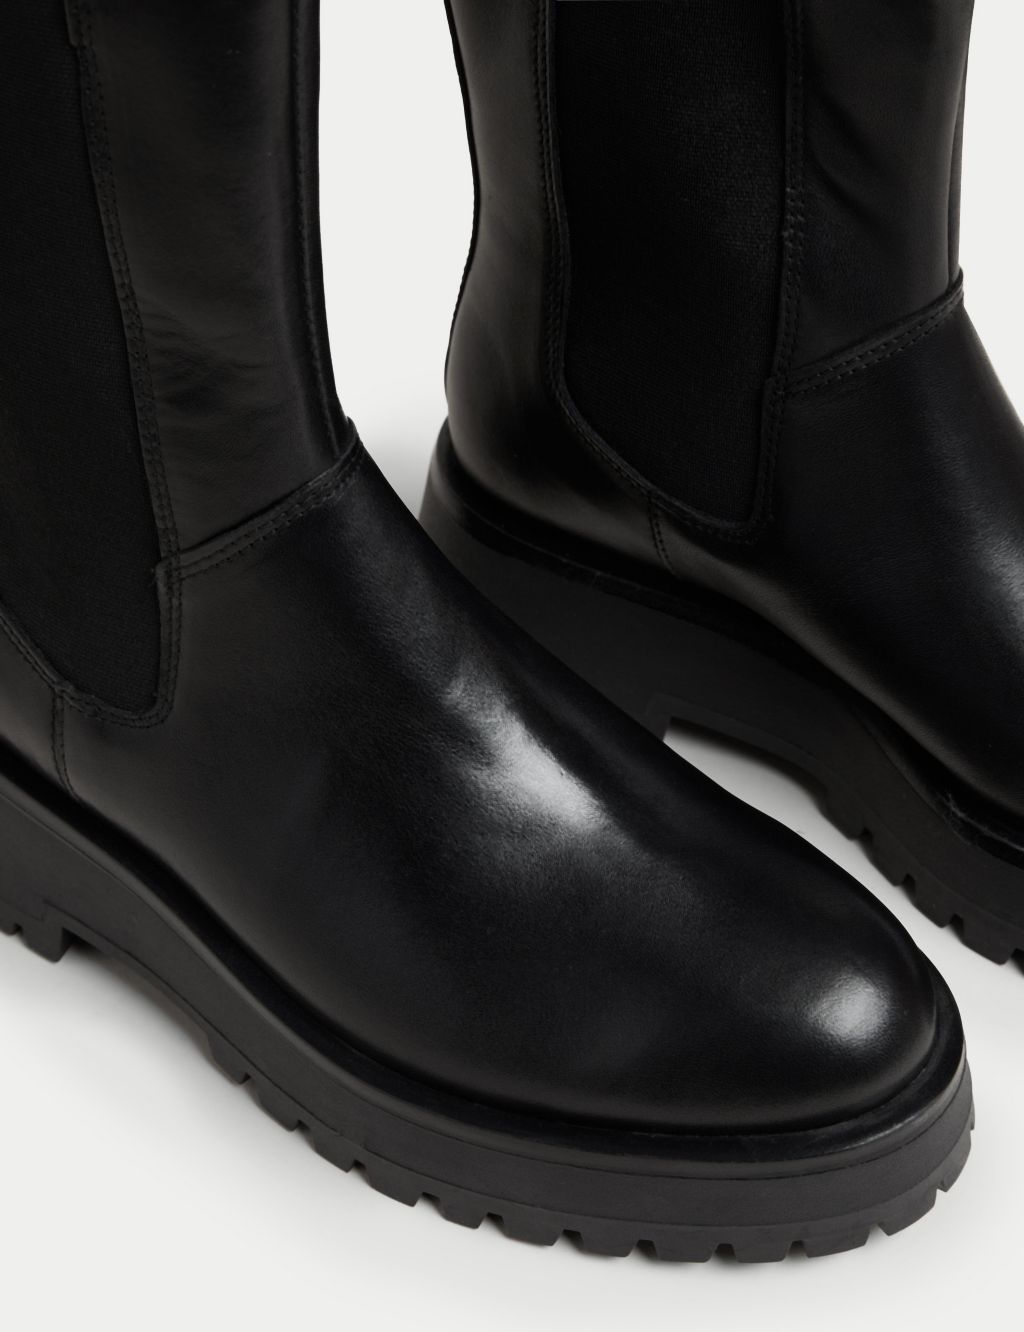 Leather Chelsea Flatform Ankle Boots image 3